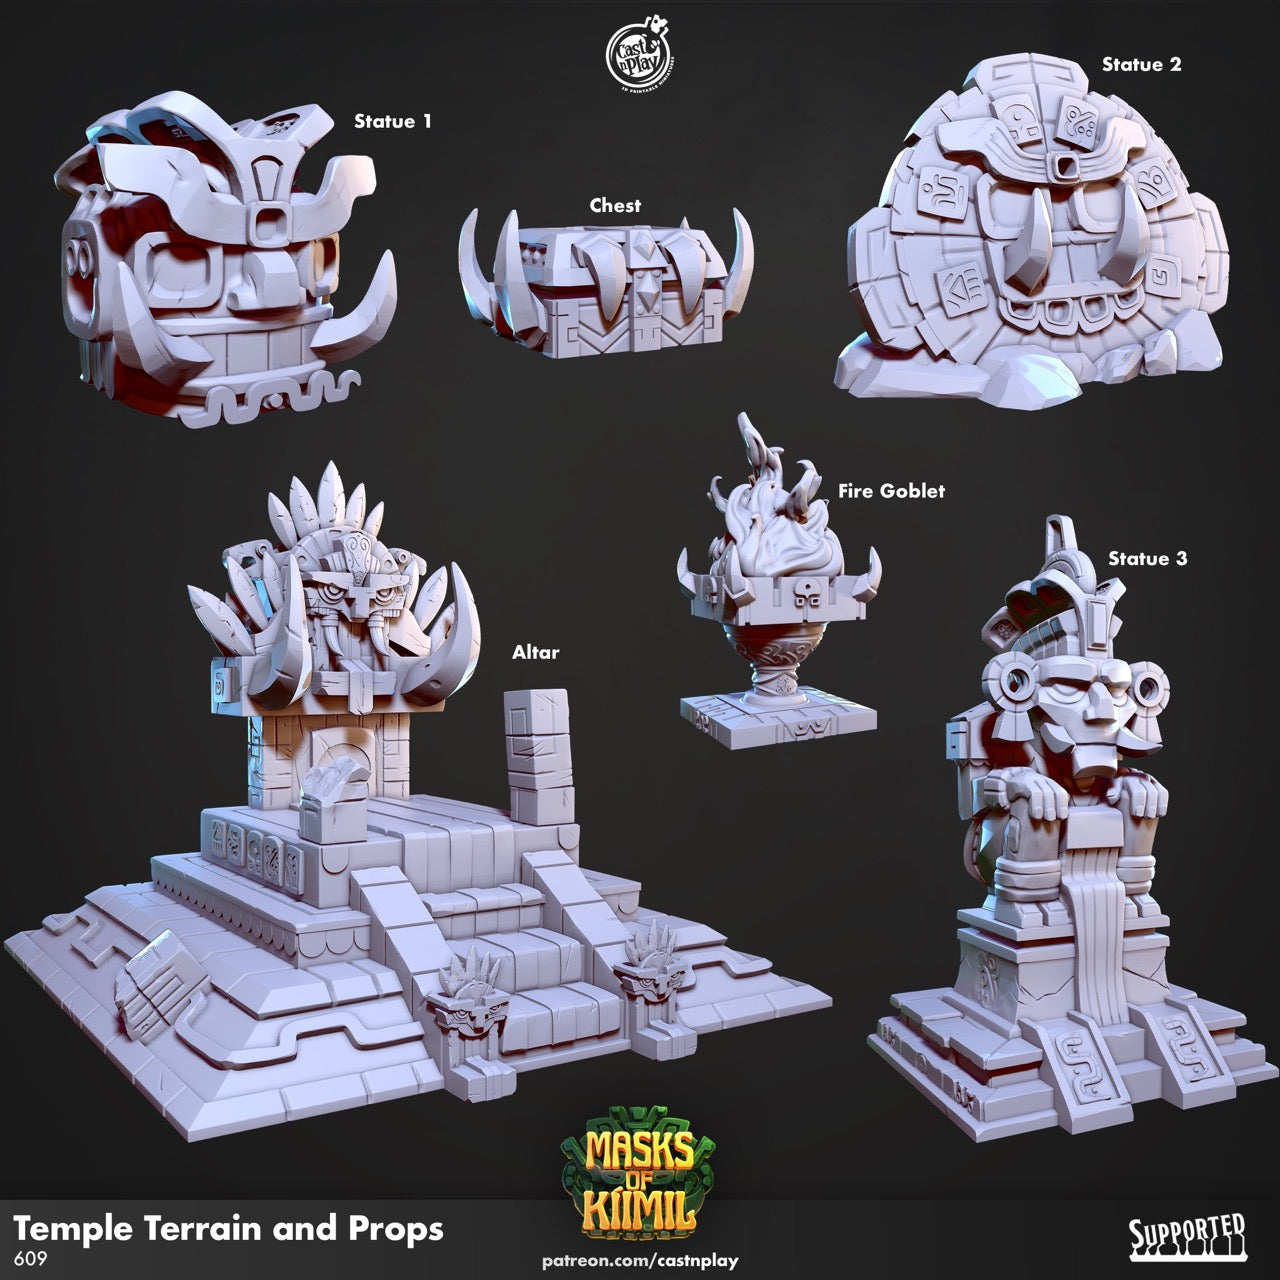 miniature Temple terrain and props sculpted by Cast n Play